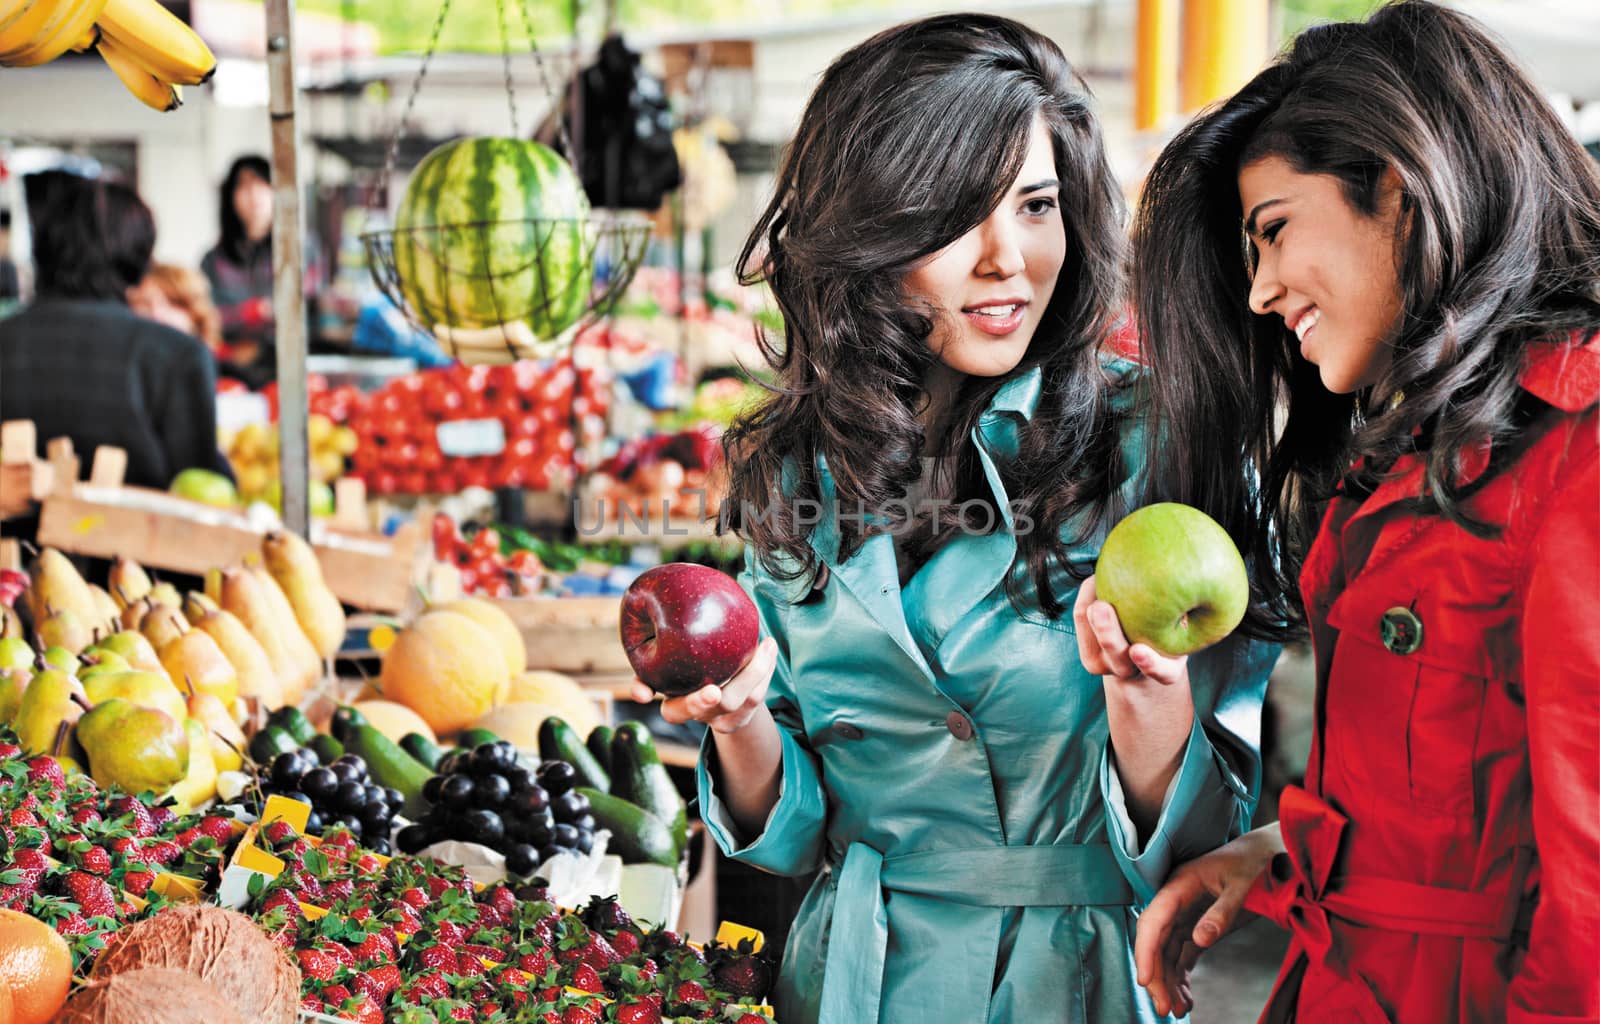 sisters shopping fruits at an outdoors farmers market